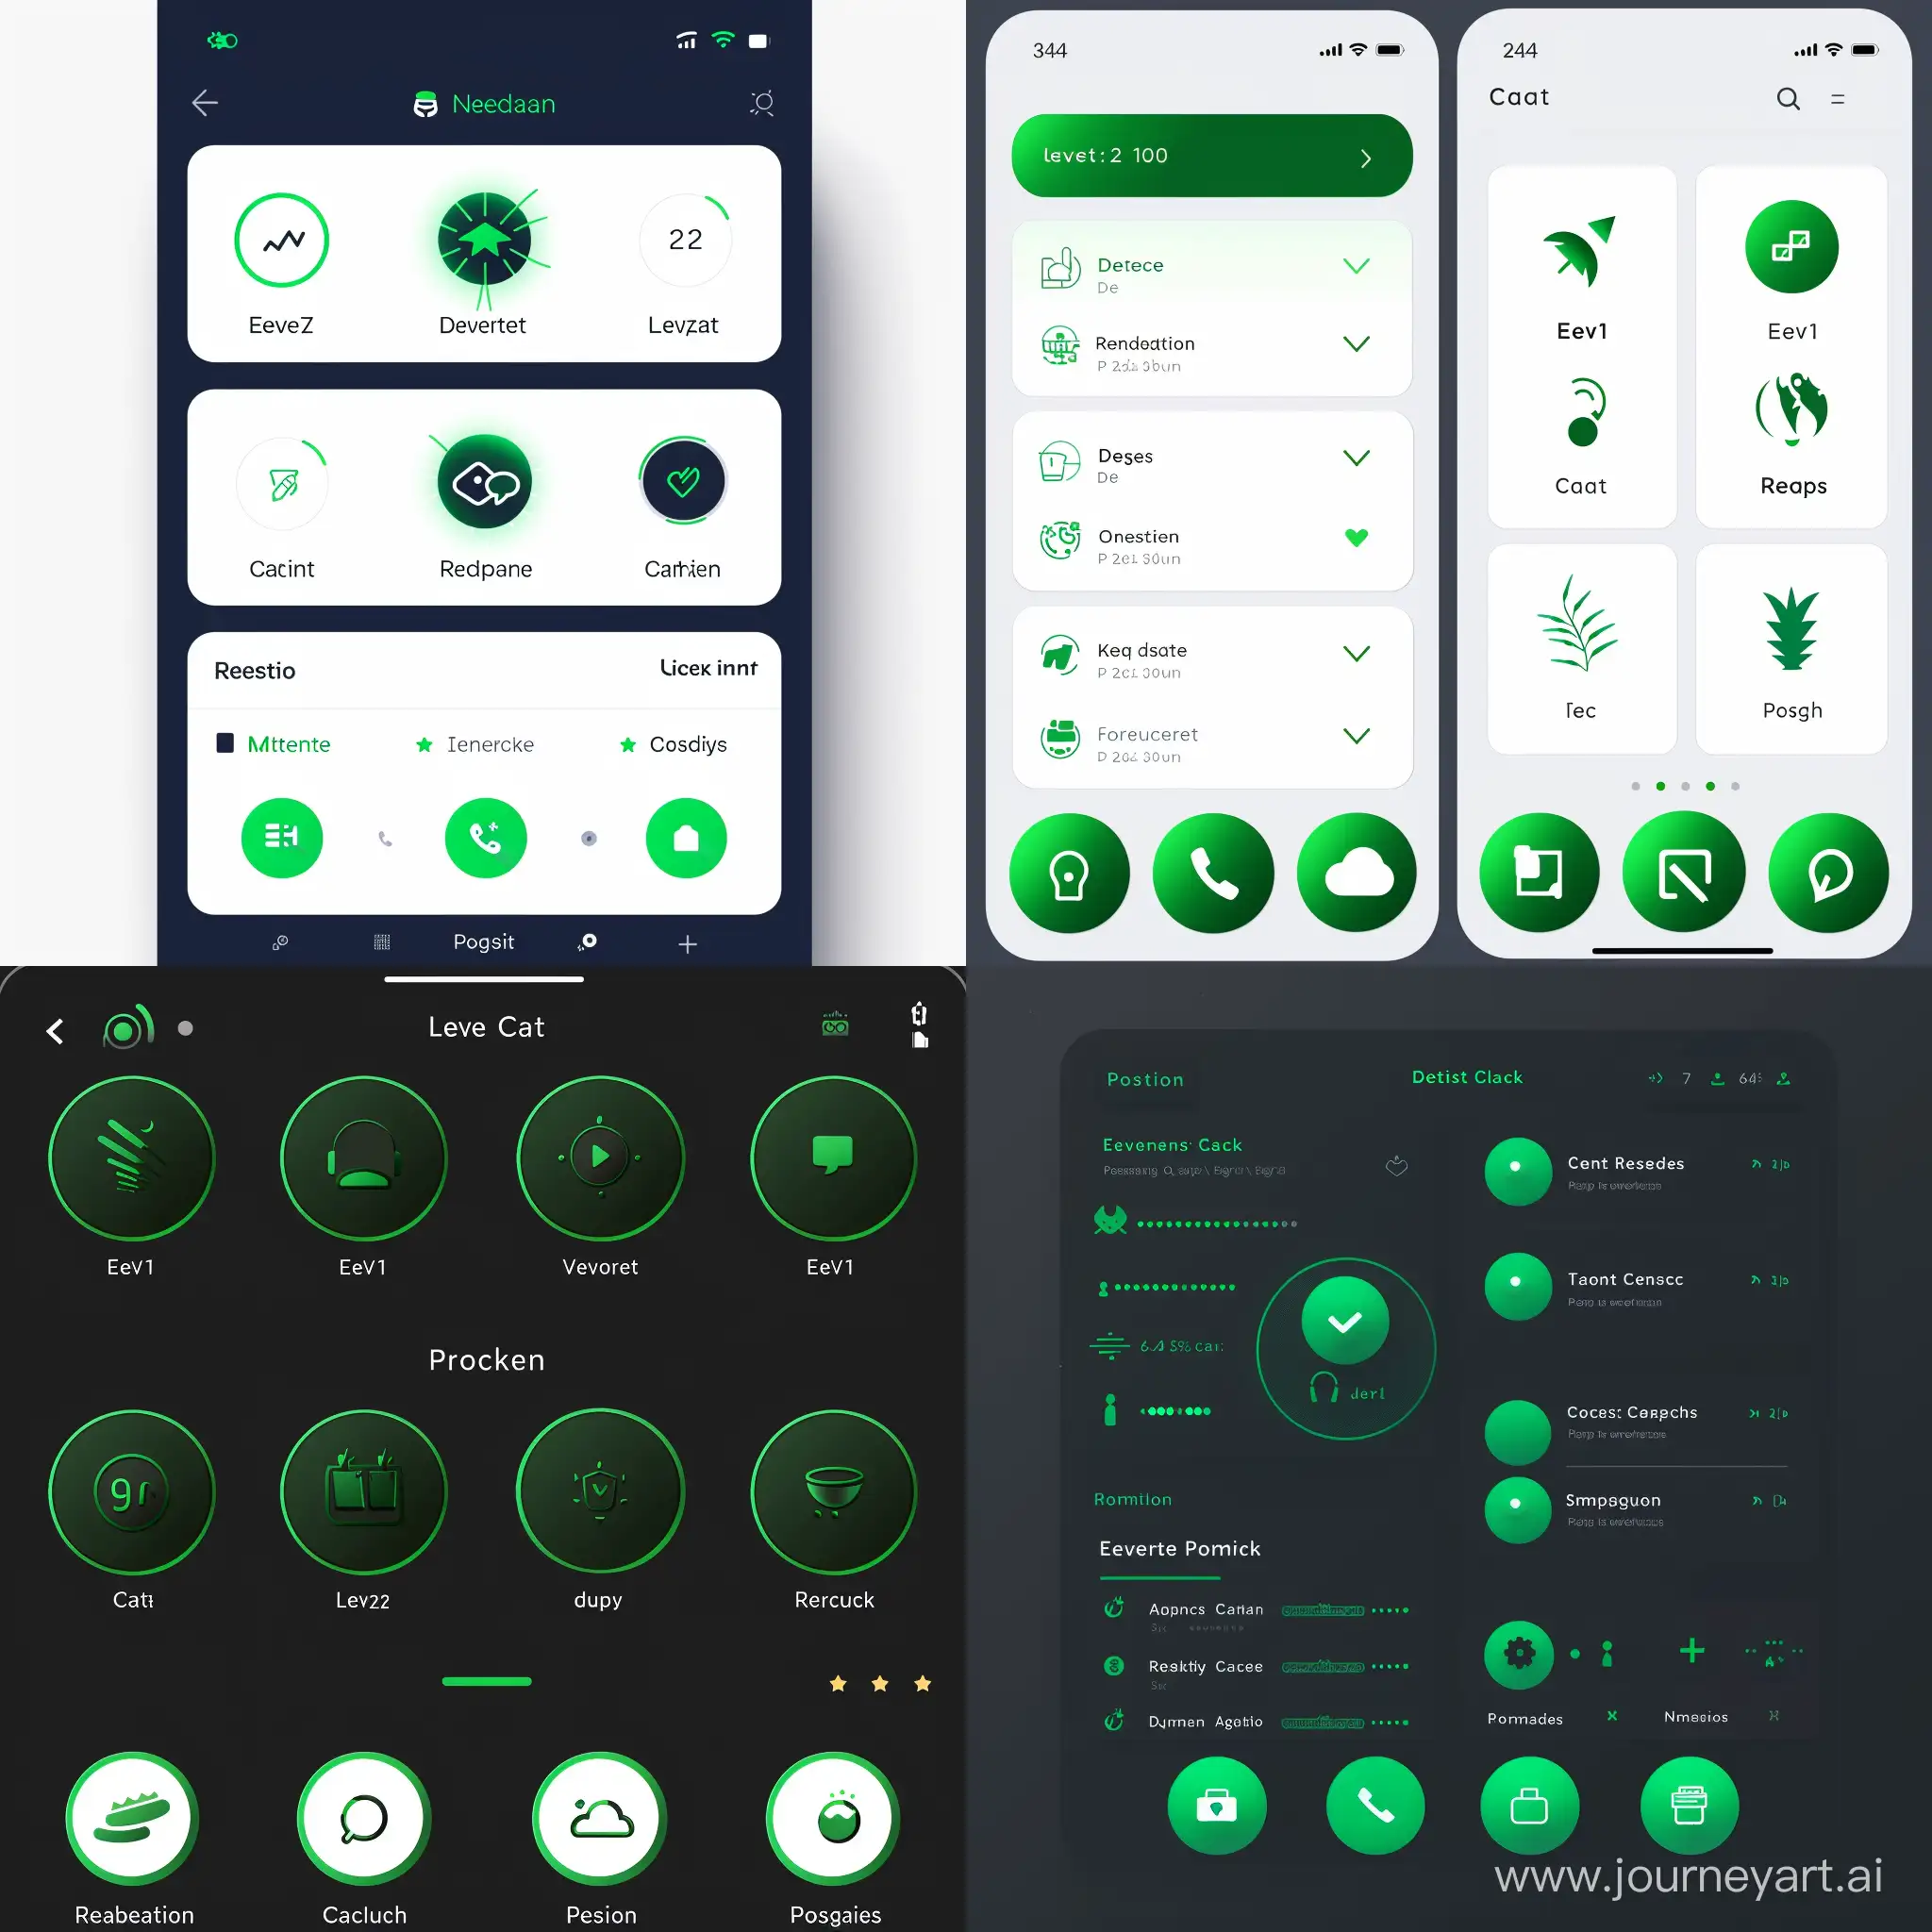 Green-Round-Icons-for-Events-Chats-Reputation-and-Projects-on-Application-Interface